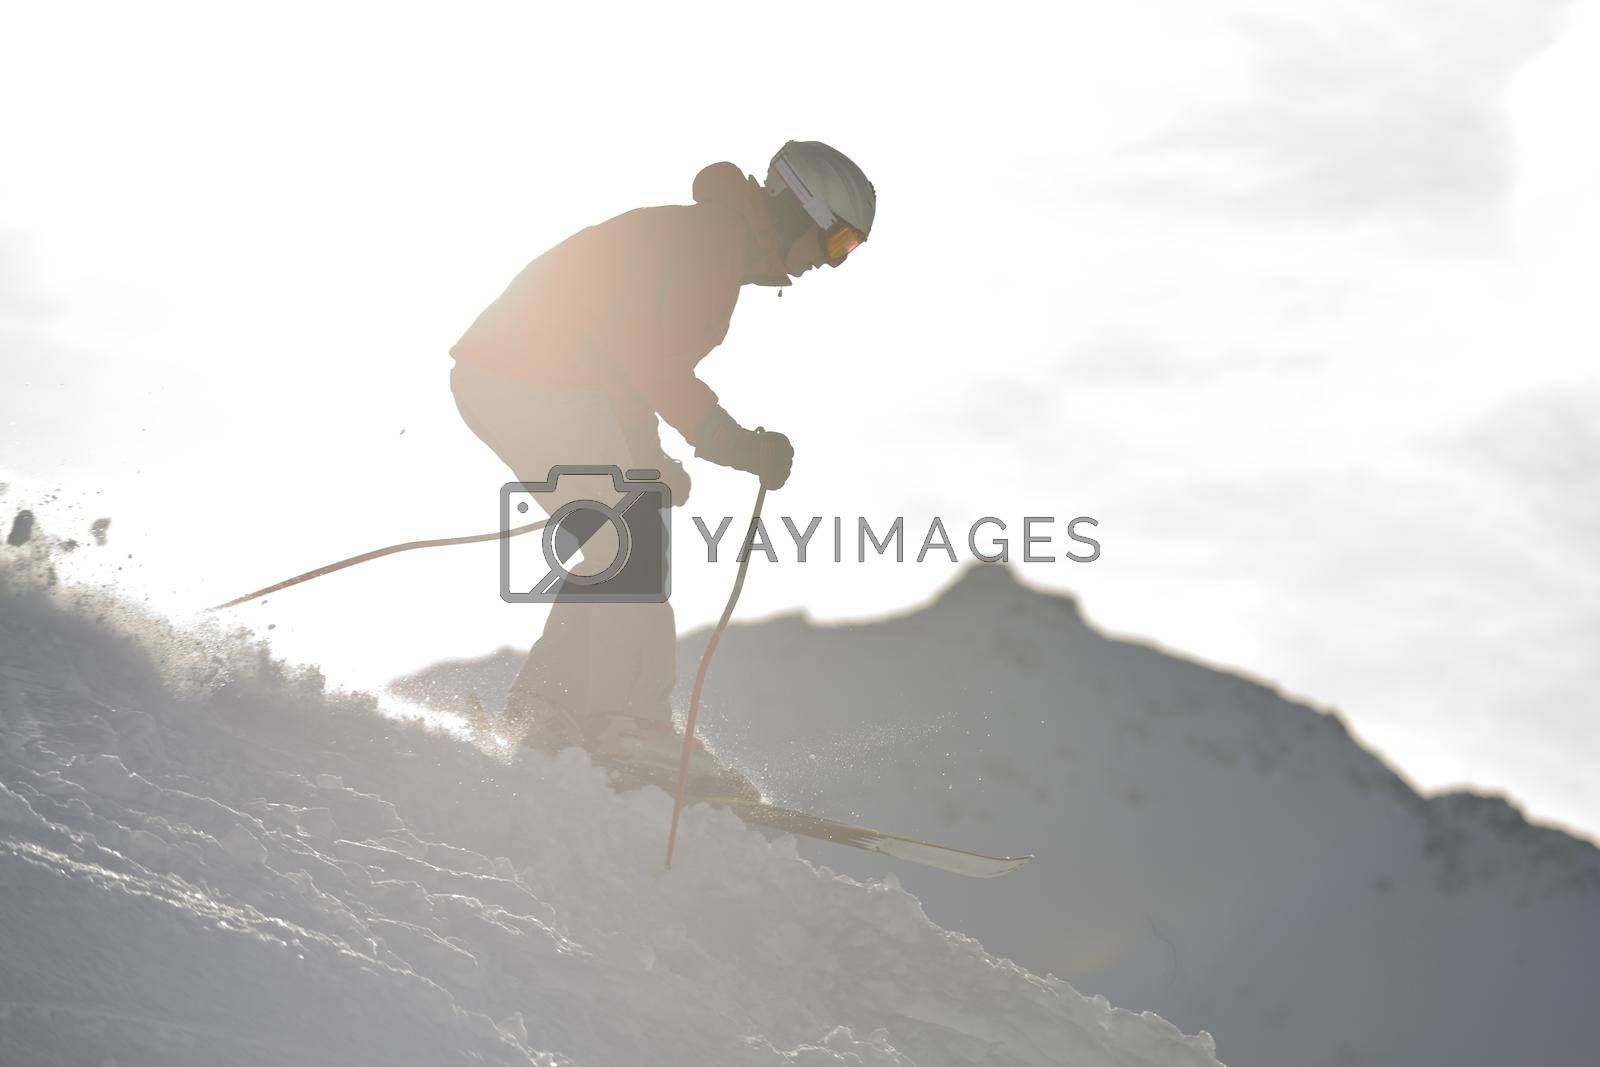 Royalty free image of  skiing on on now at winter season by dotshock